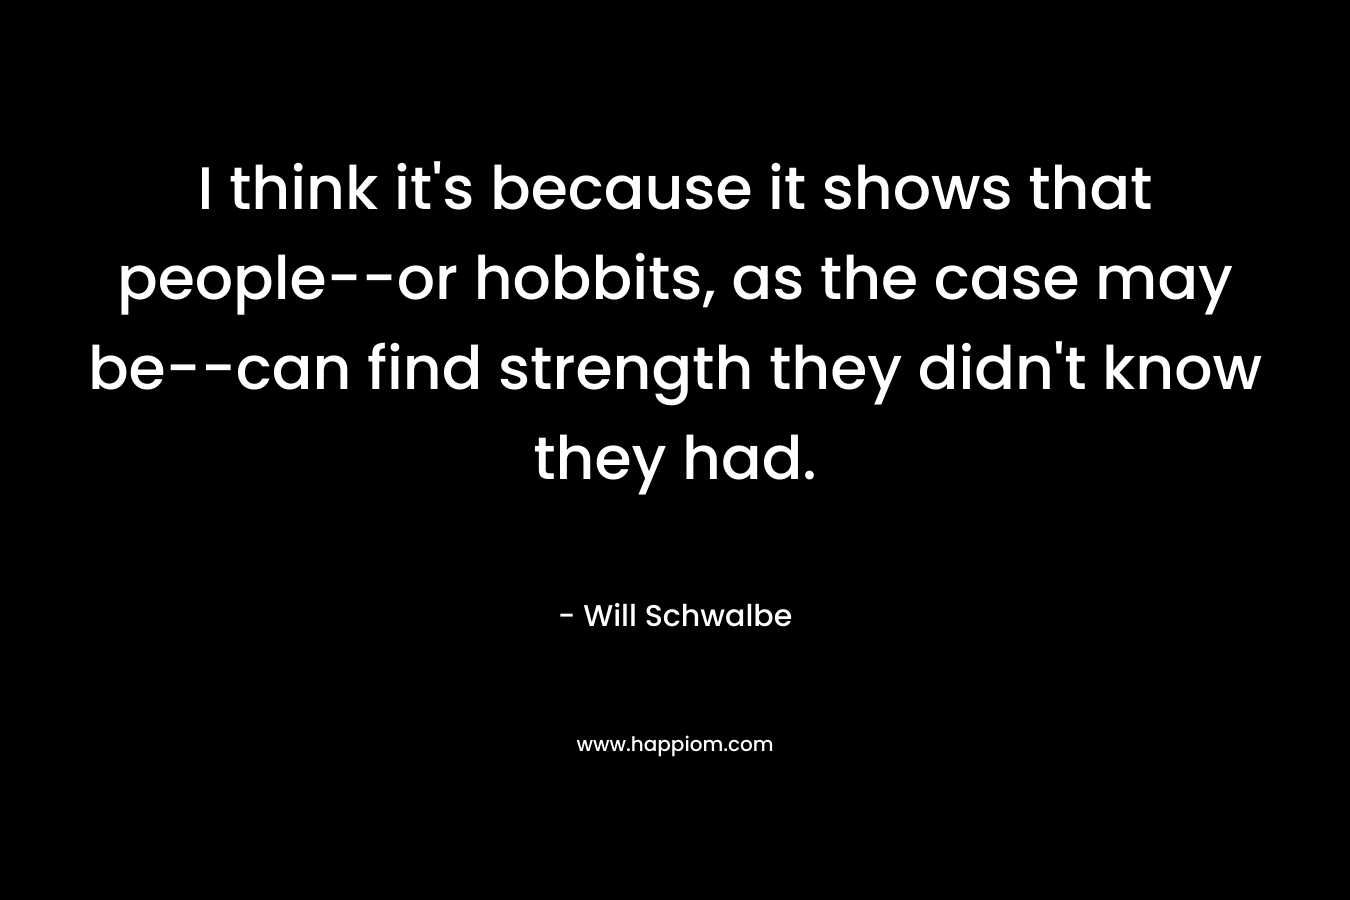 I think it's because it shows that people--or hobbits, as the case may be--can find strength they didn't know they had.